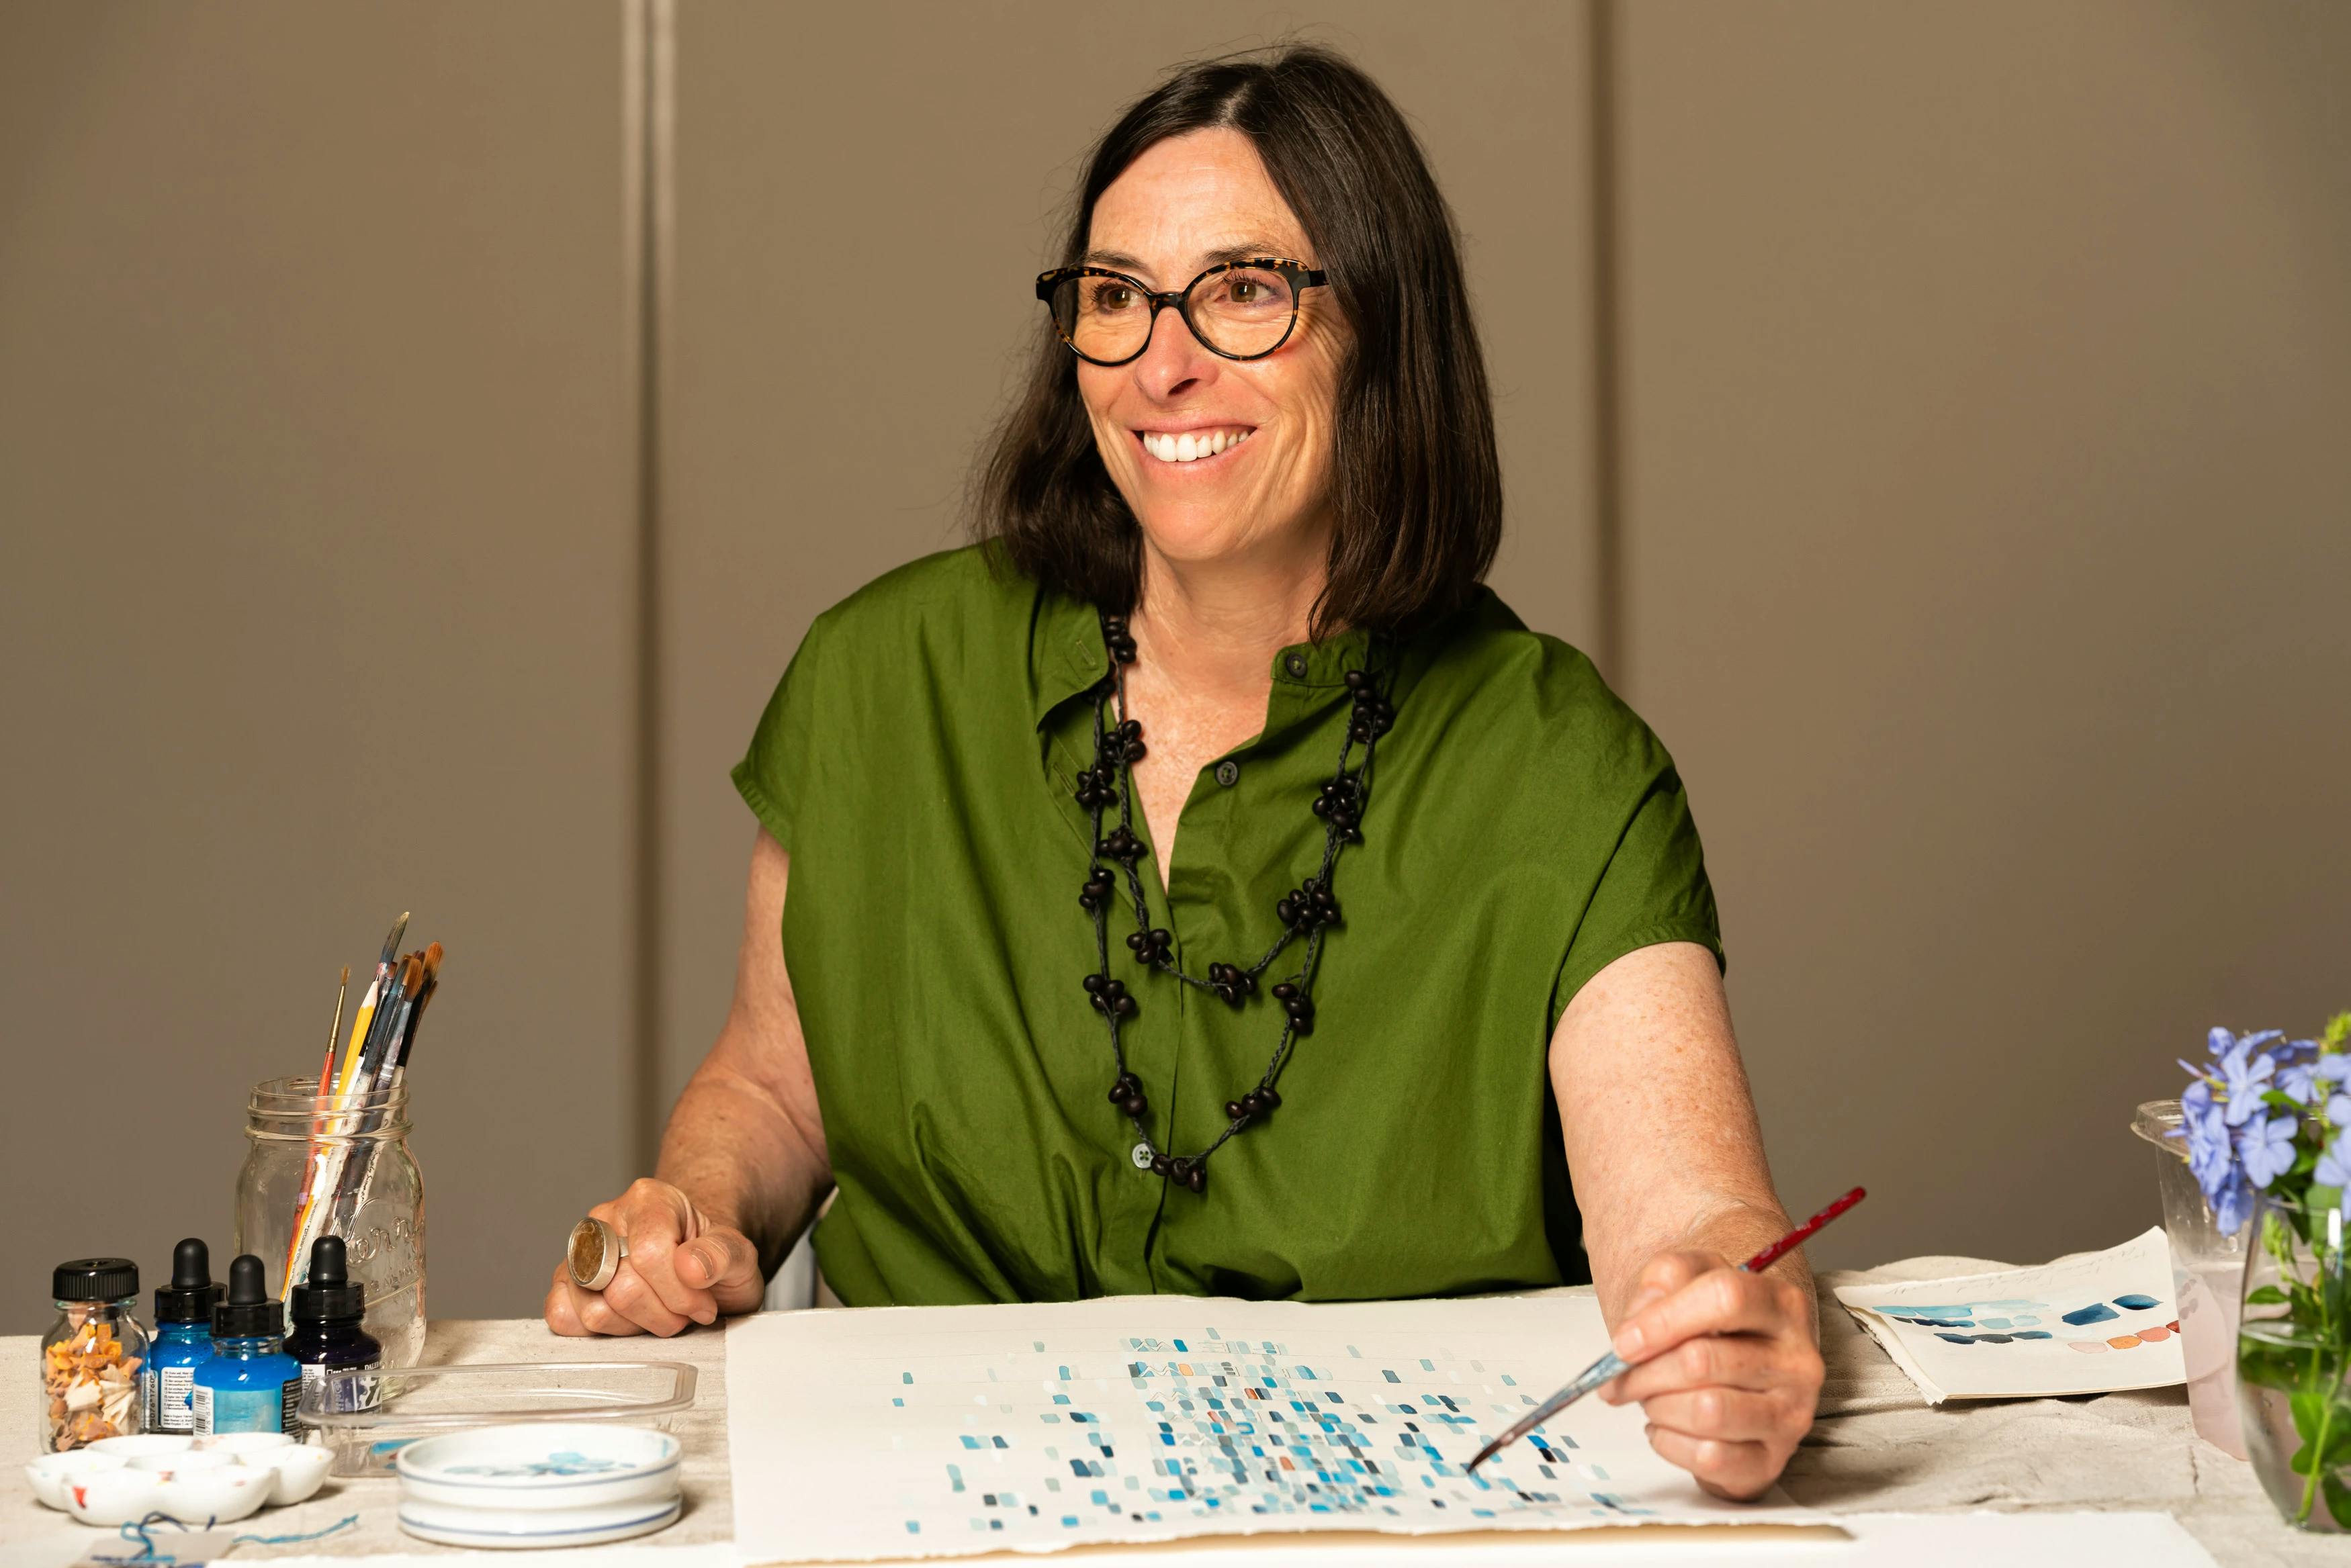 Artist Gail Tarantino wearing a green shirt and holding a paintbrush within a studio at MacArthur Place.